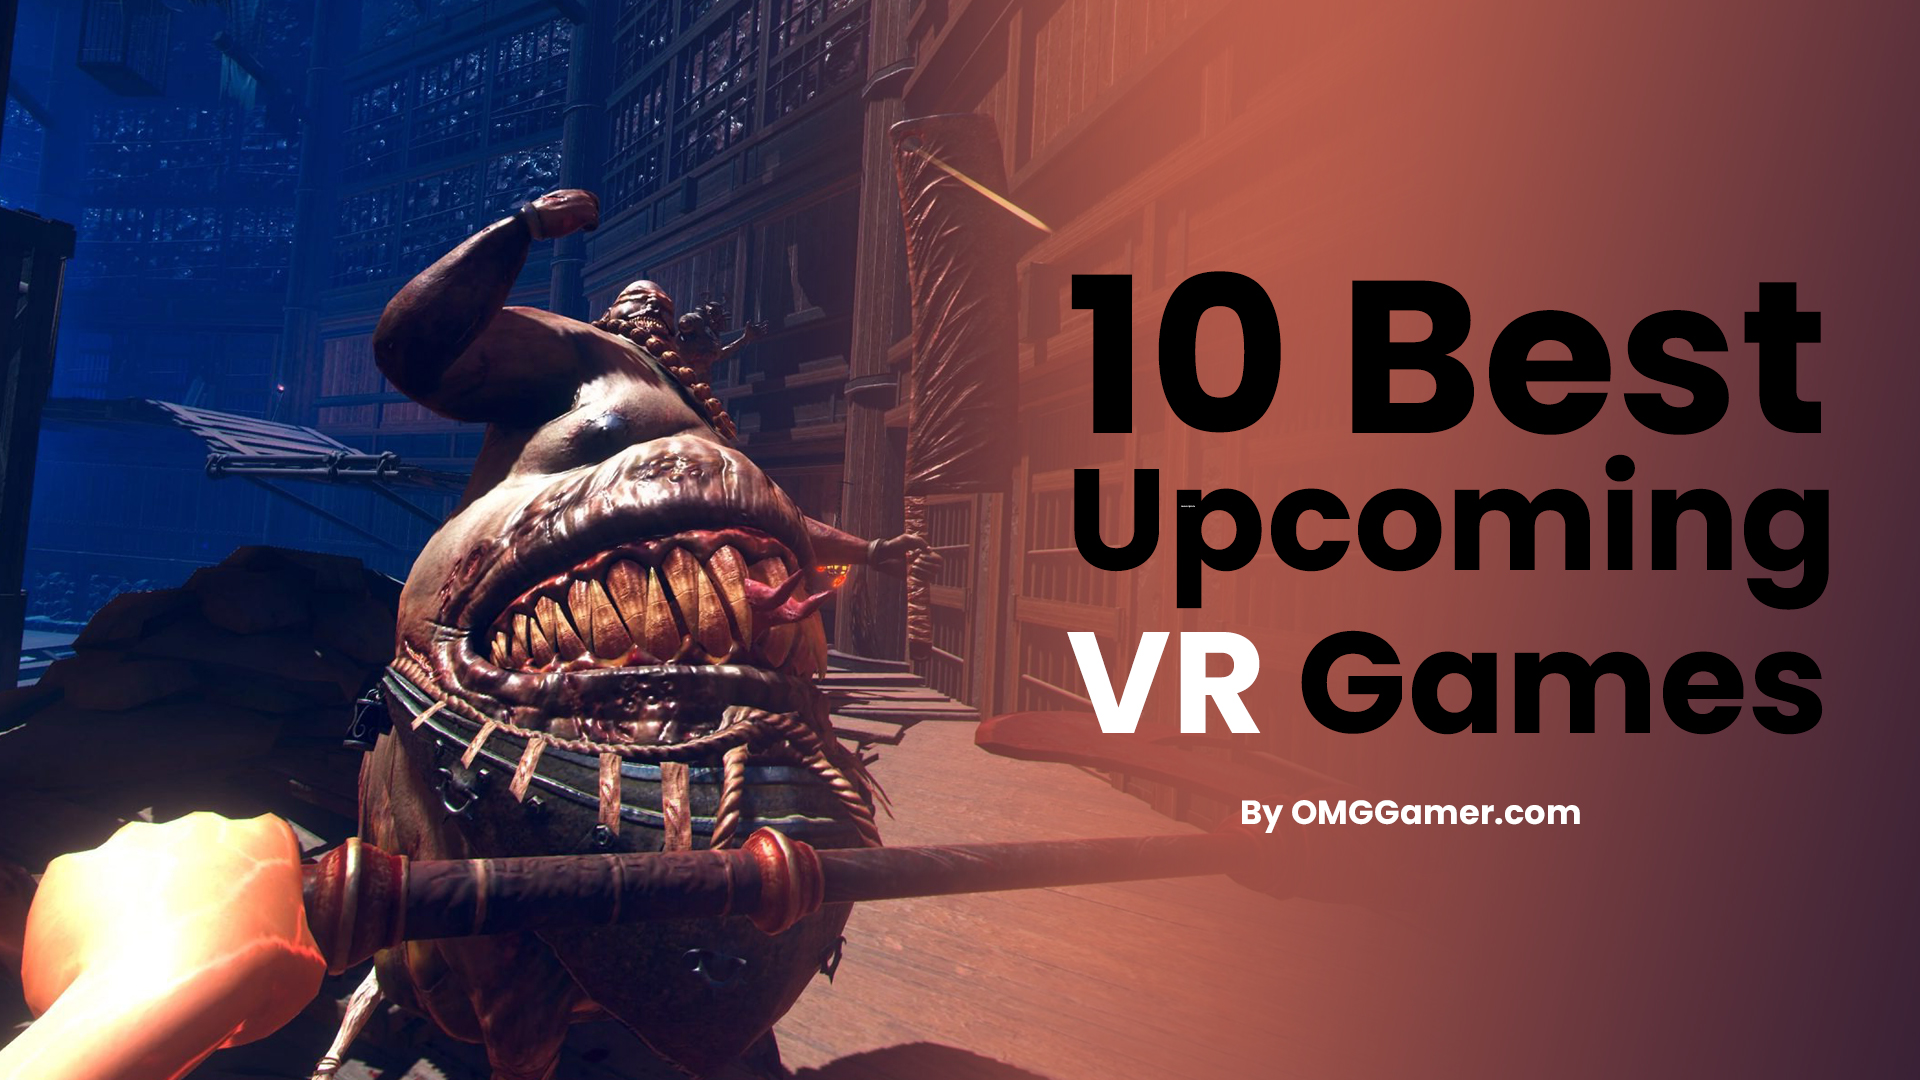 Best Upcoming VR Games